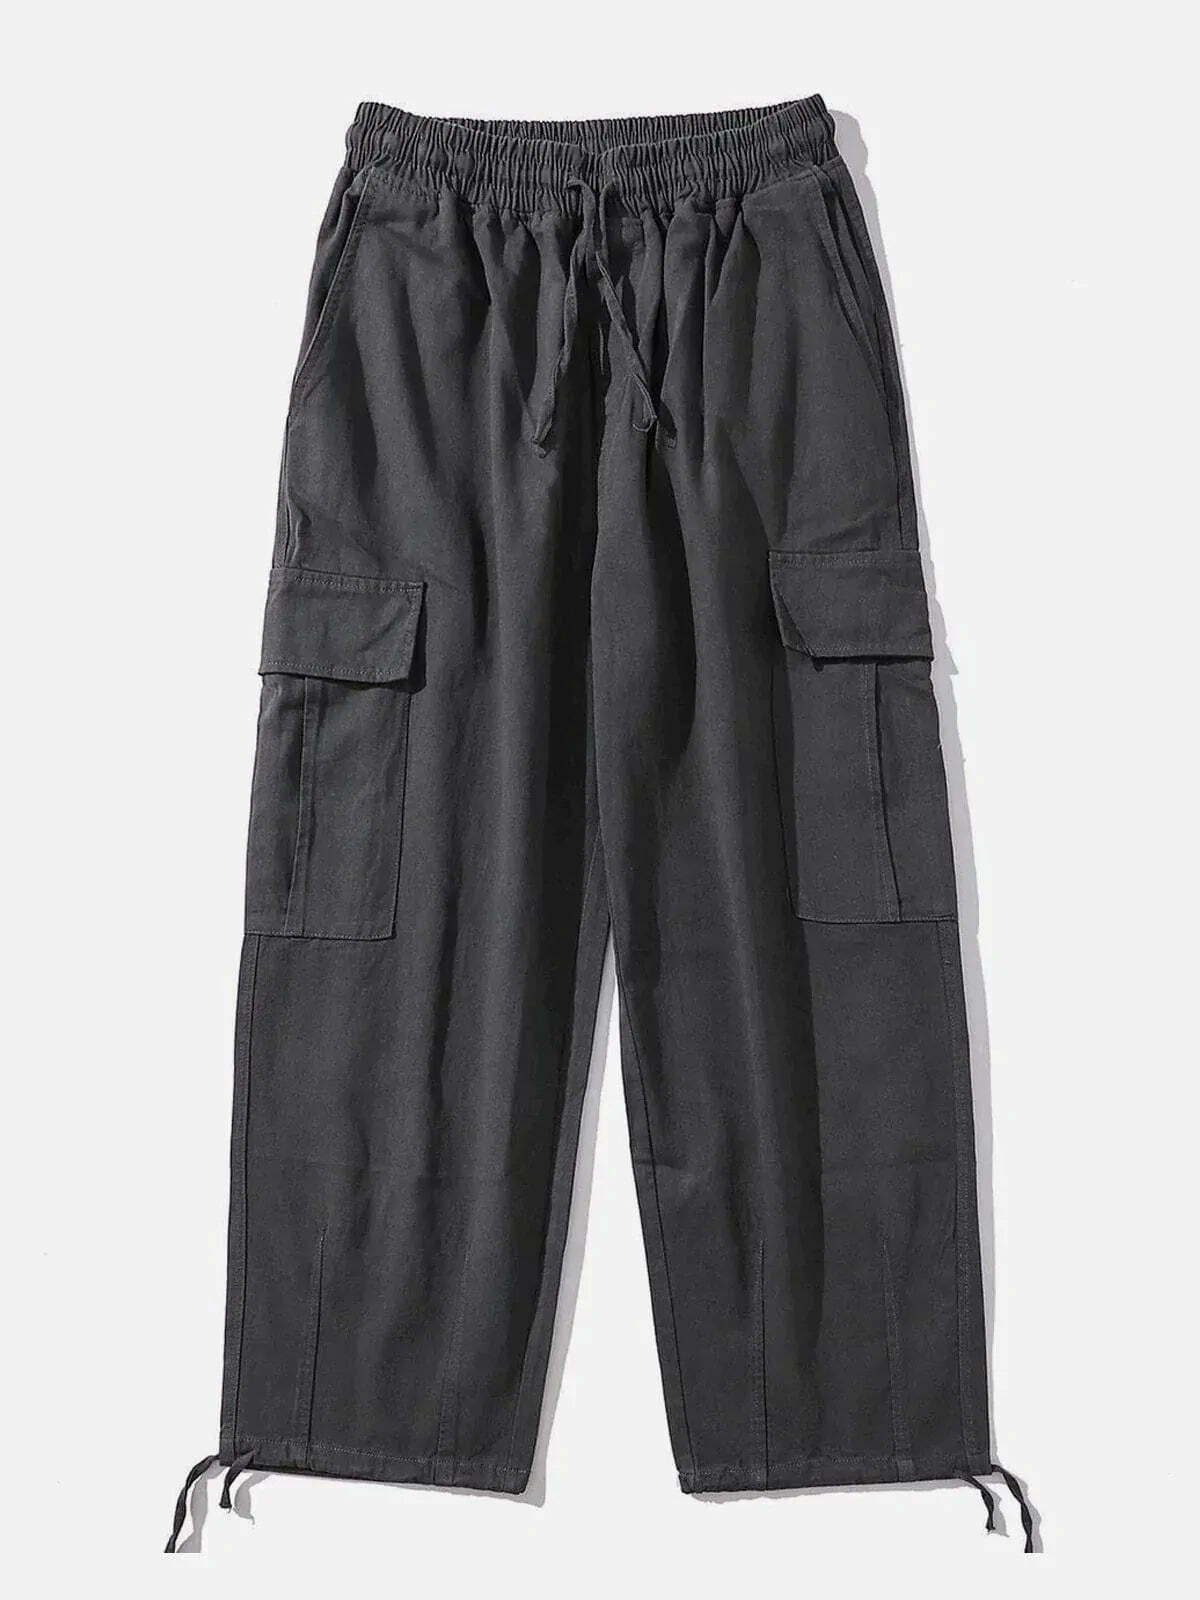 solid color cargo pants edgy streetwear essential 6048